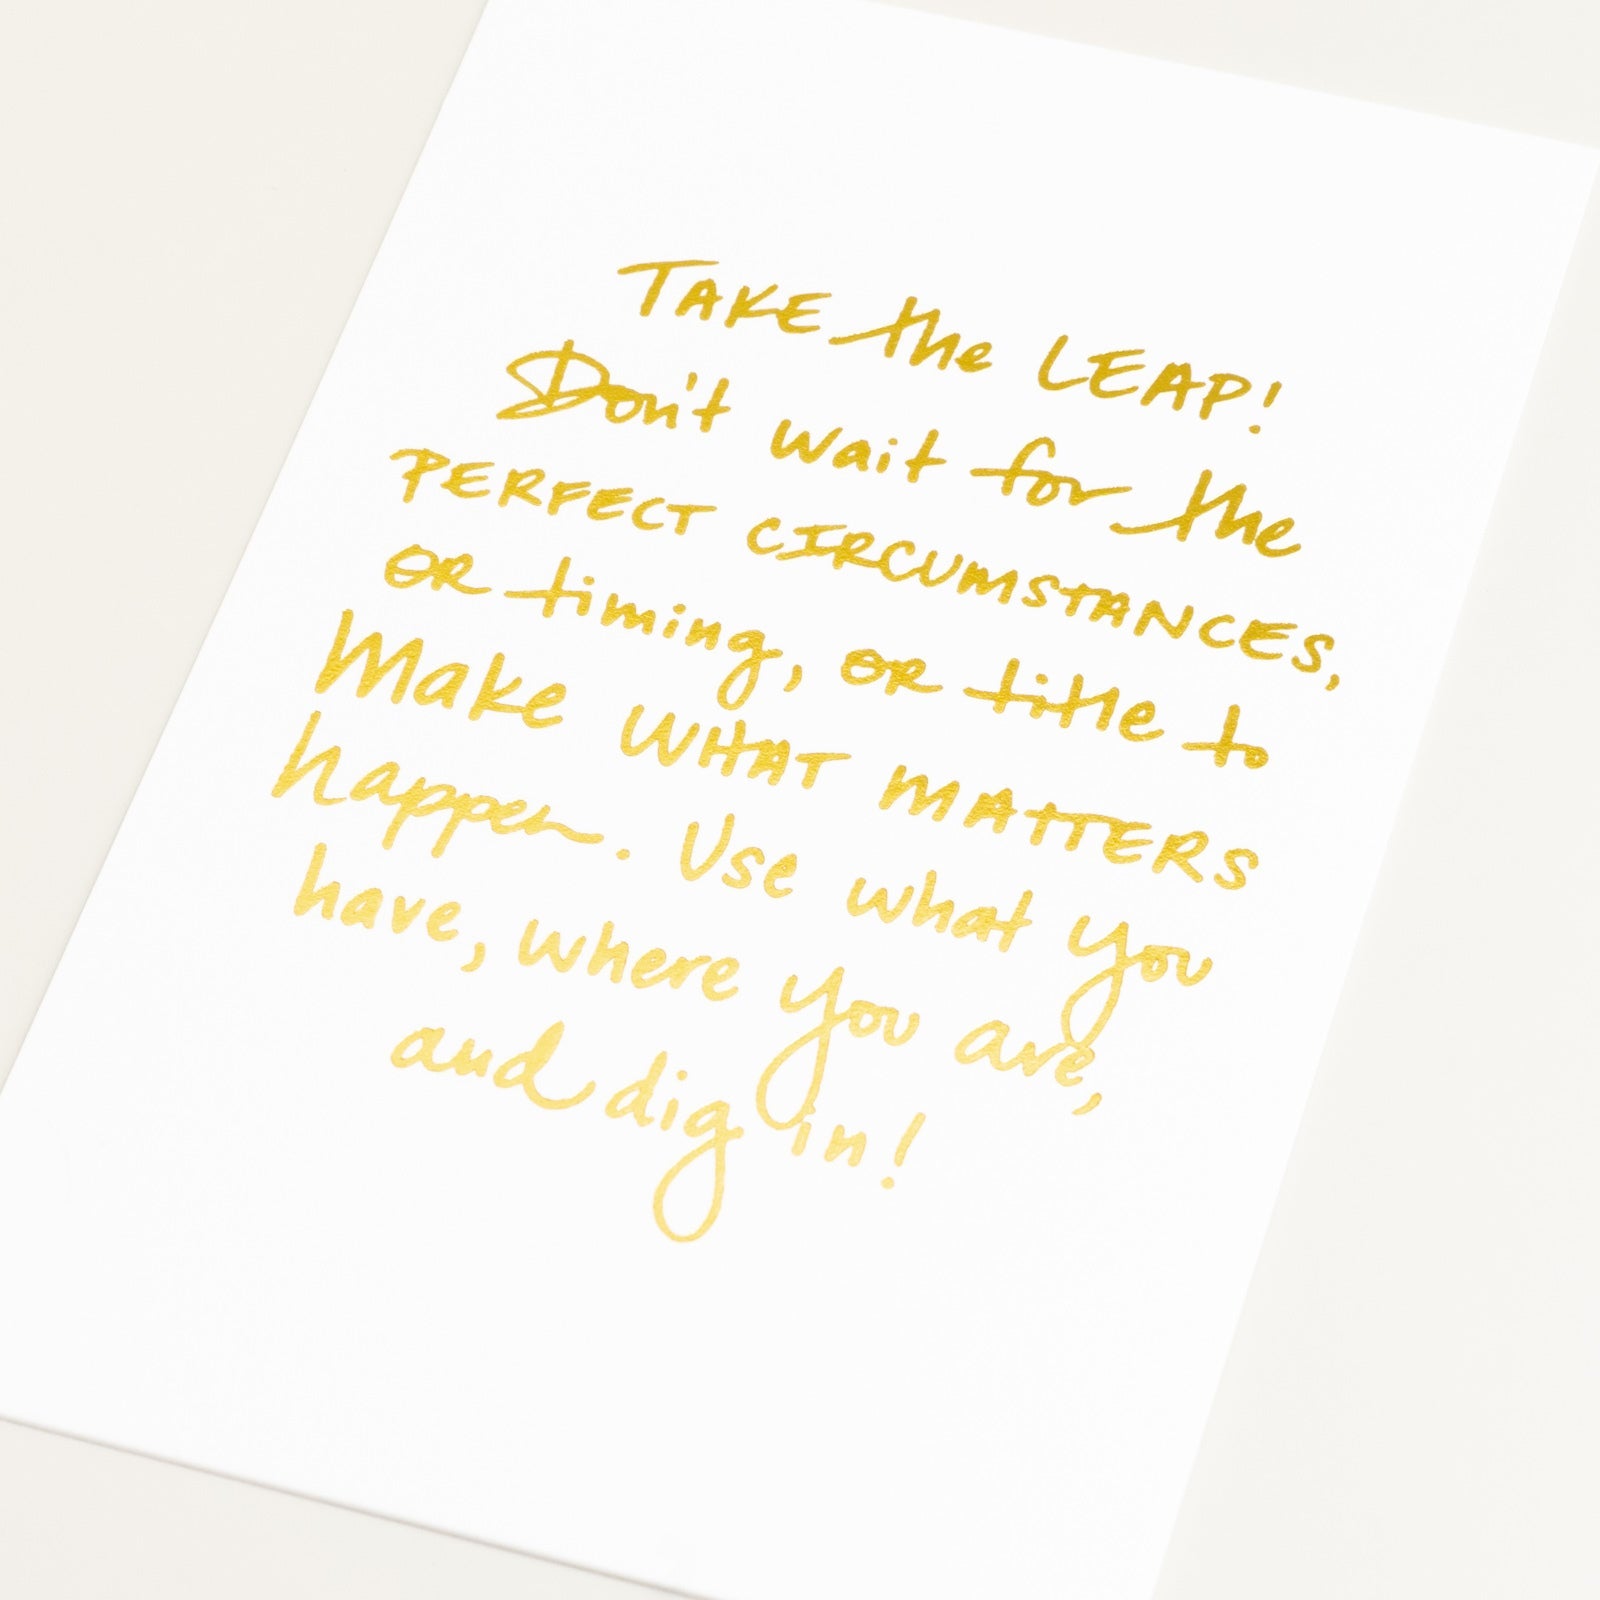 Cultivate What Matters - Art Print - Take the Leap - Gold Foil 